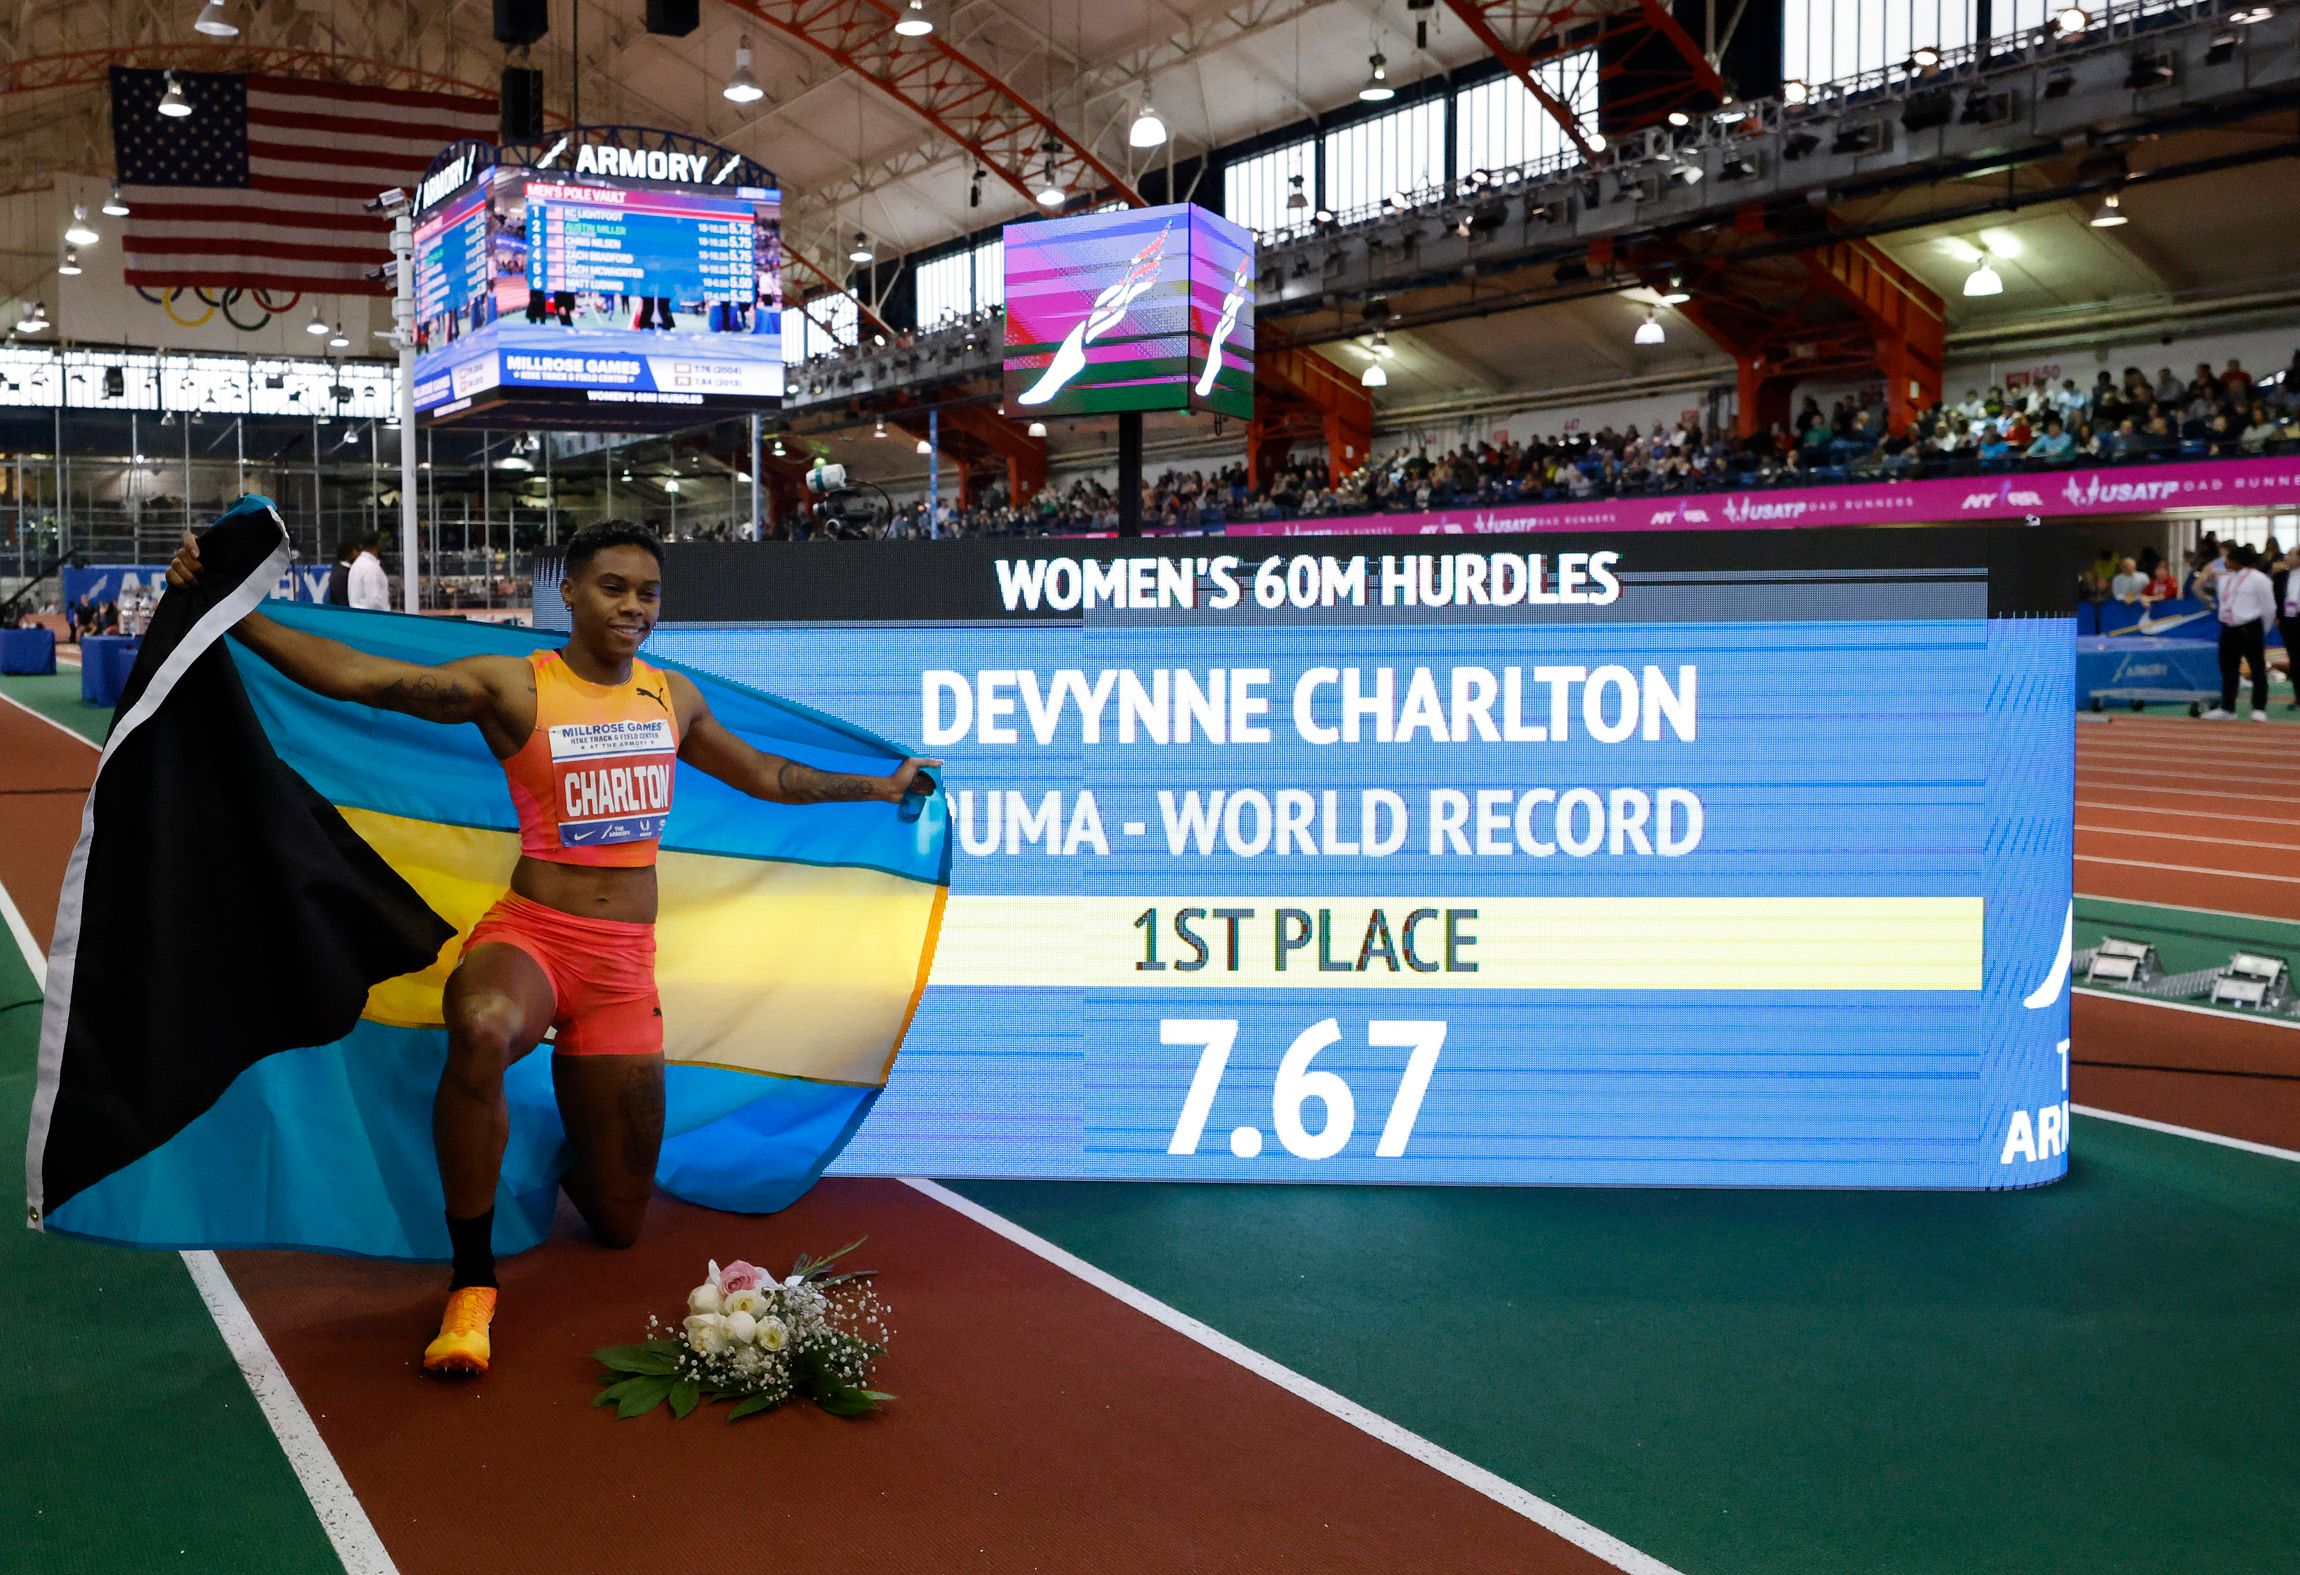 Devynne Charlton with her world record figures in New York